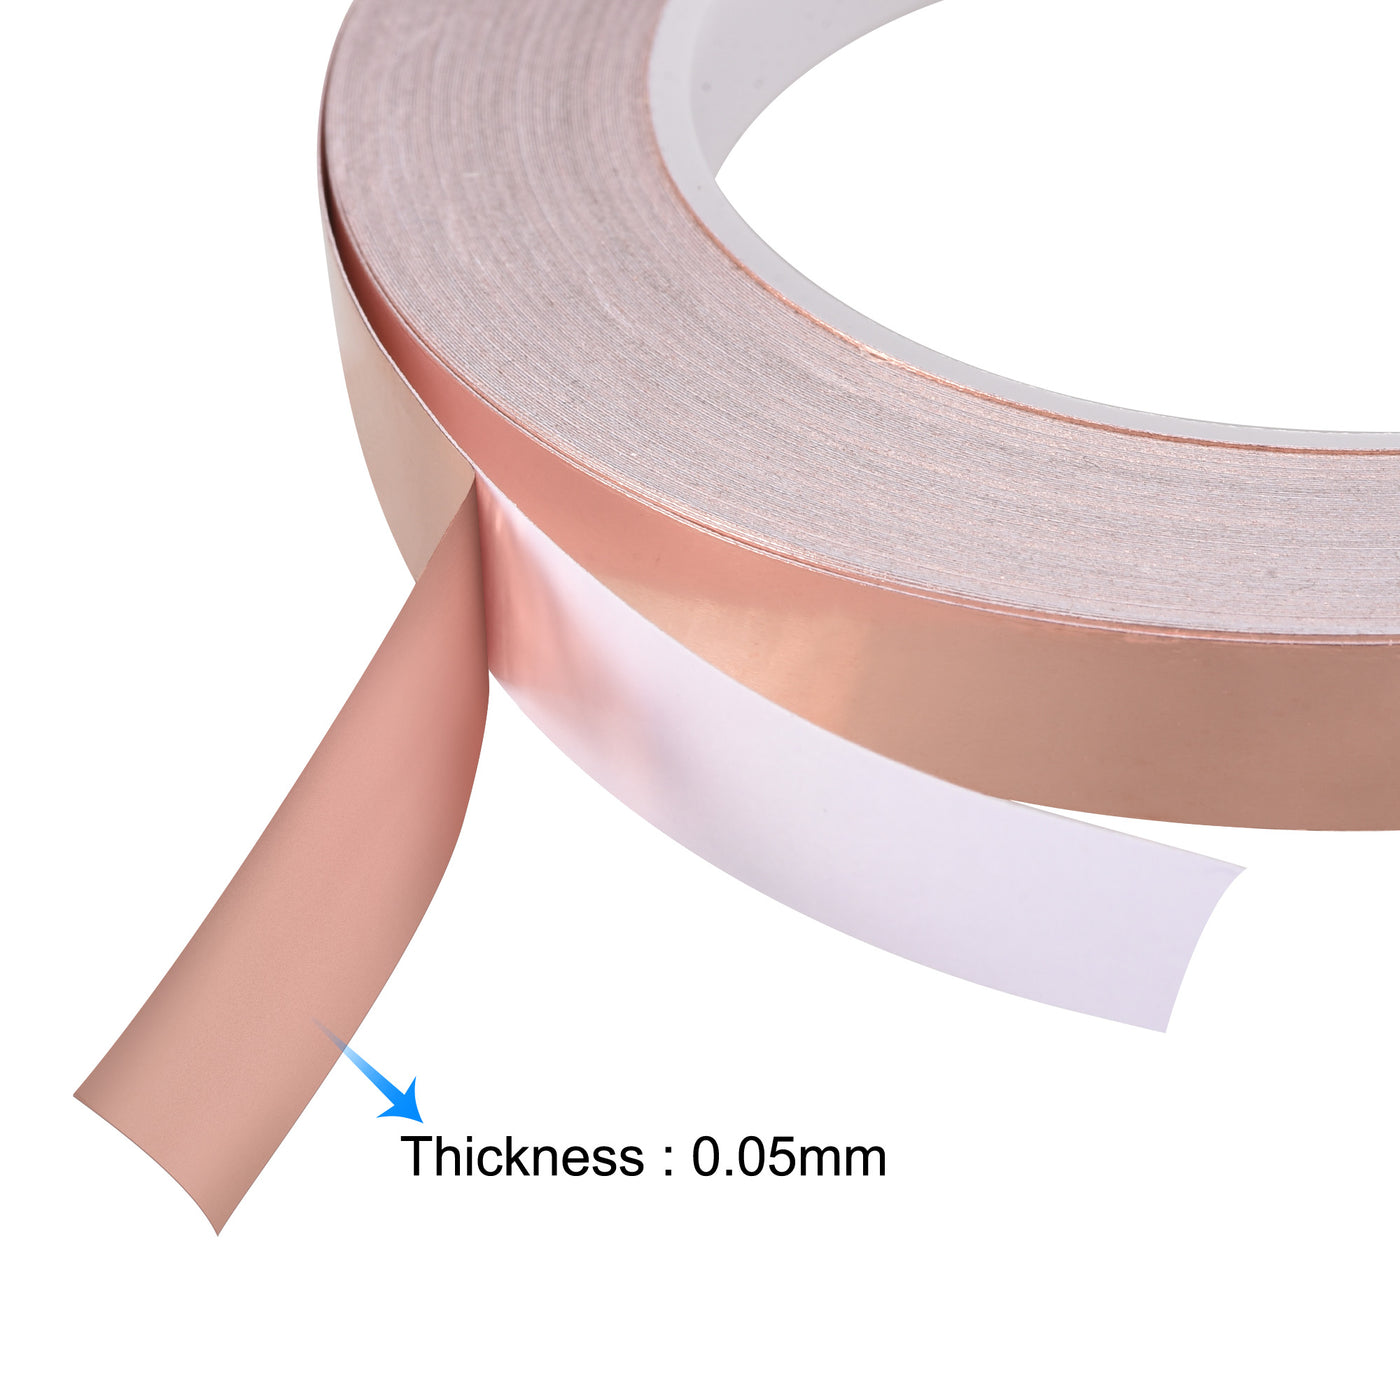 uxcell Uxcell Single-Sided Conductive Tape Copper Foil Tape 4mm x 30m/98.4ft 2pcs